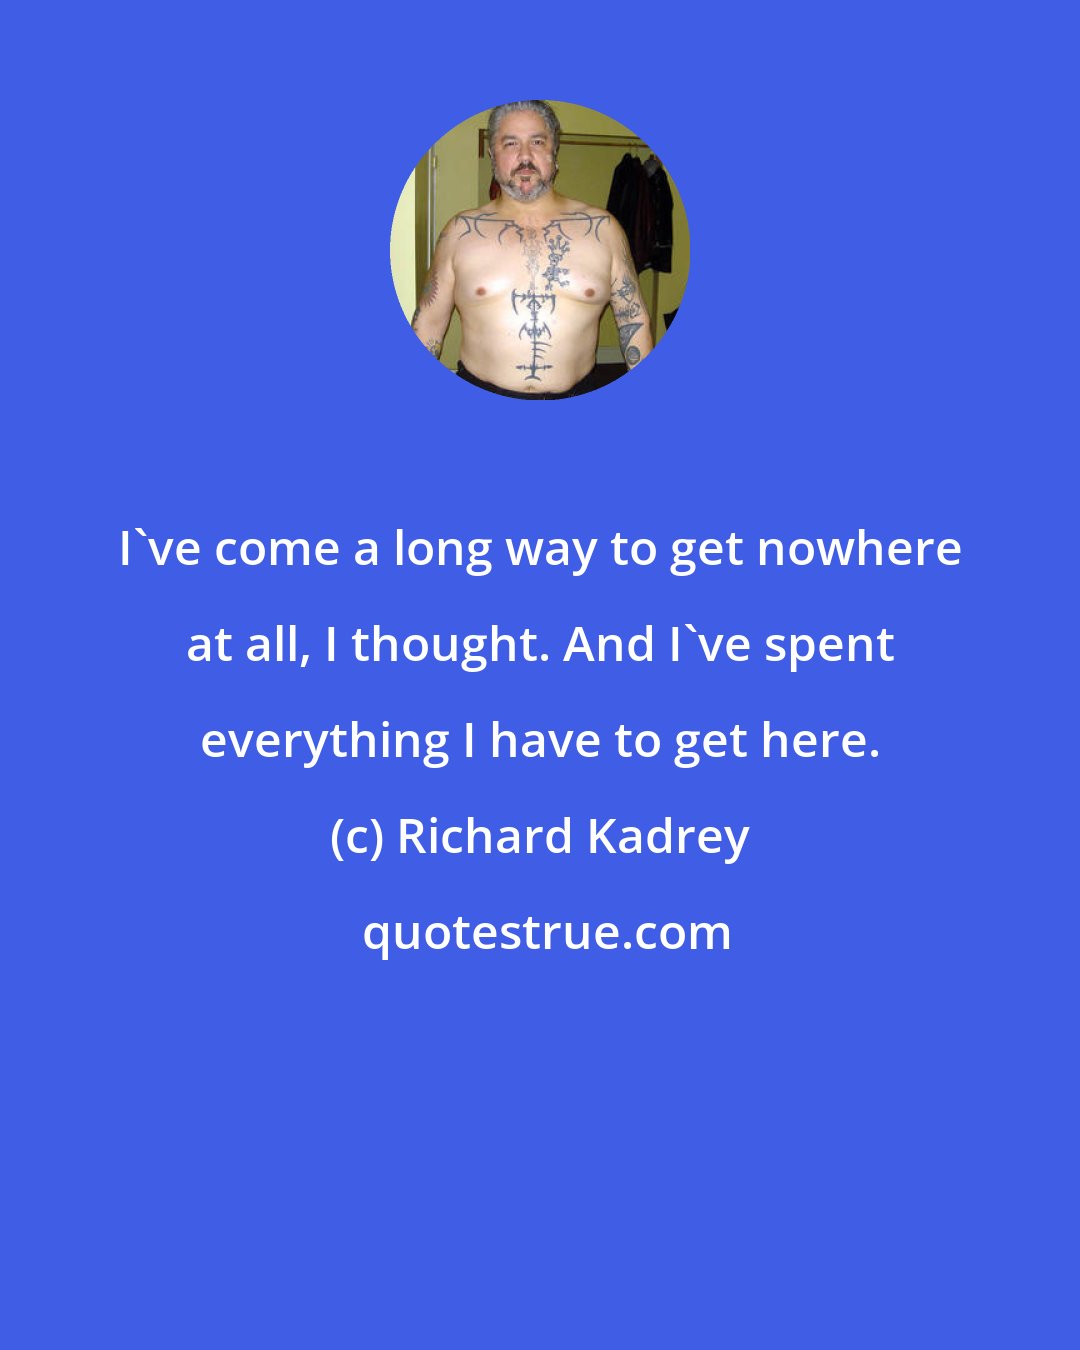 Richard Kadrey: I've come a long way to get nowhere at all, I thought. And I've spent everything I have to get here.